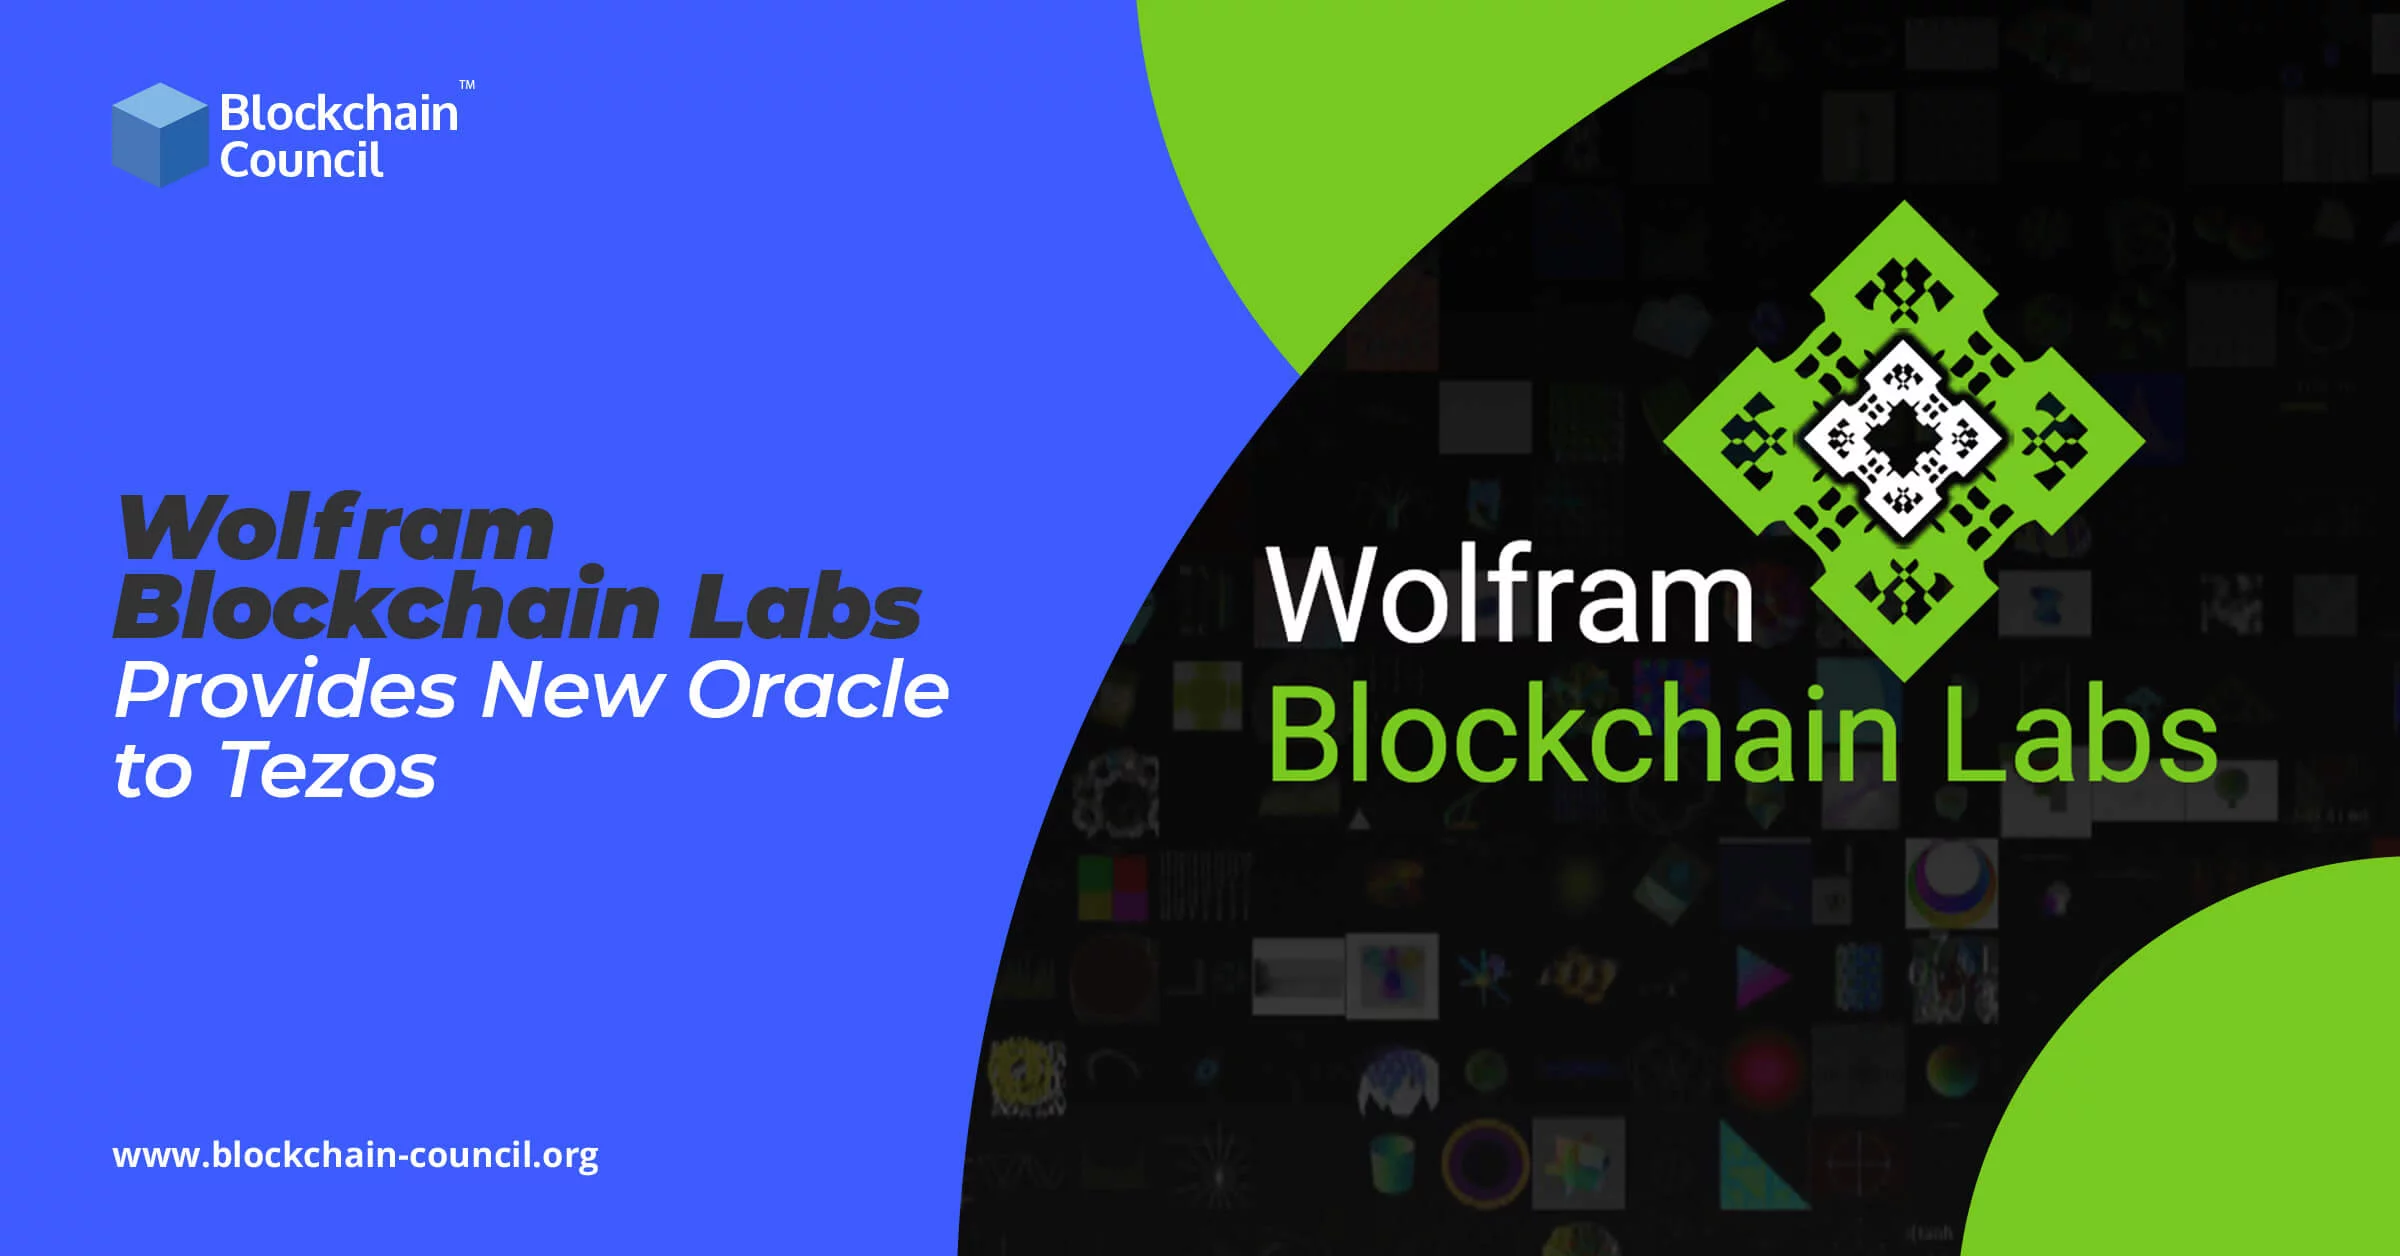 Wolfram Blockchain Labs Provides New Oracle to Tezos